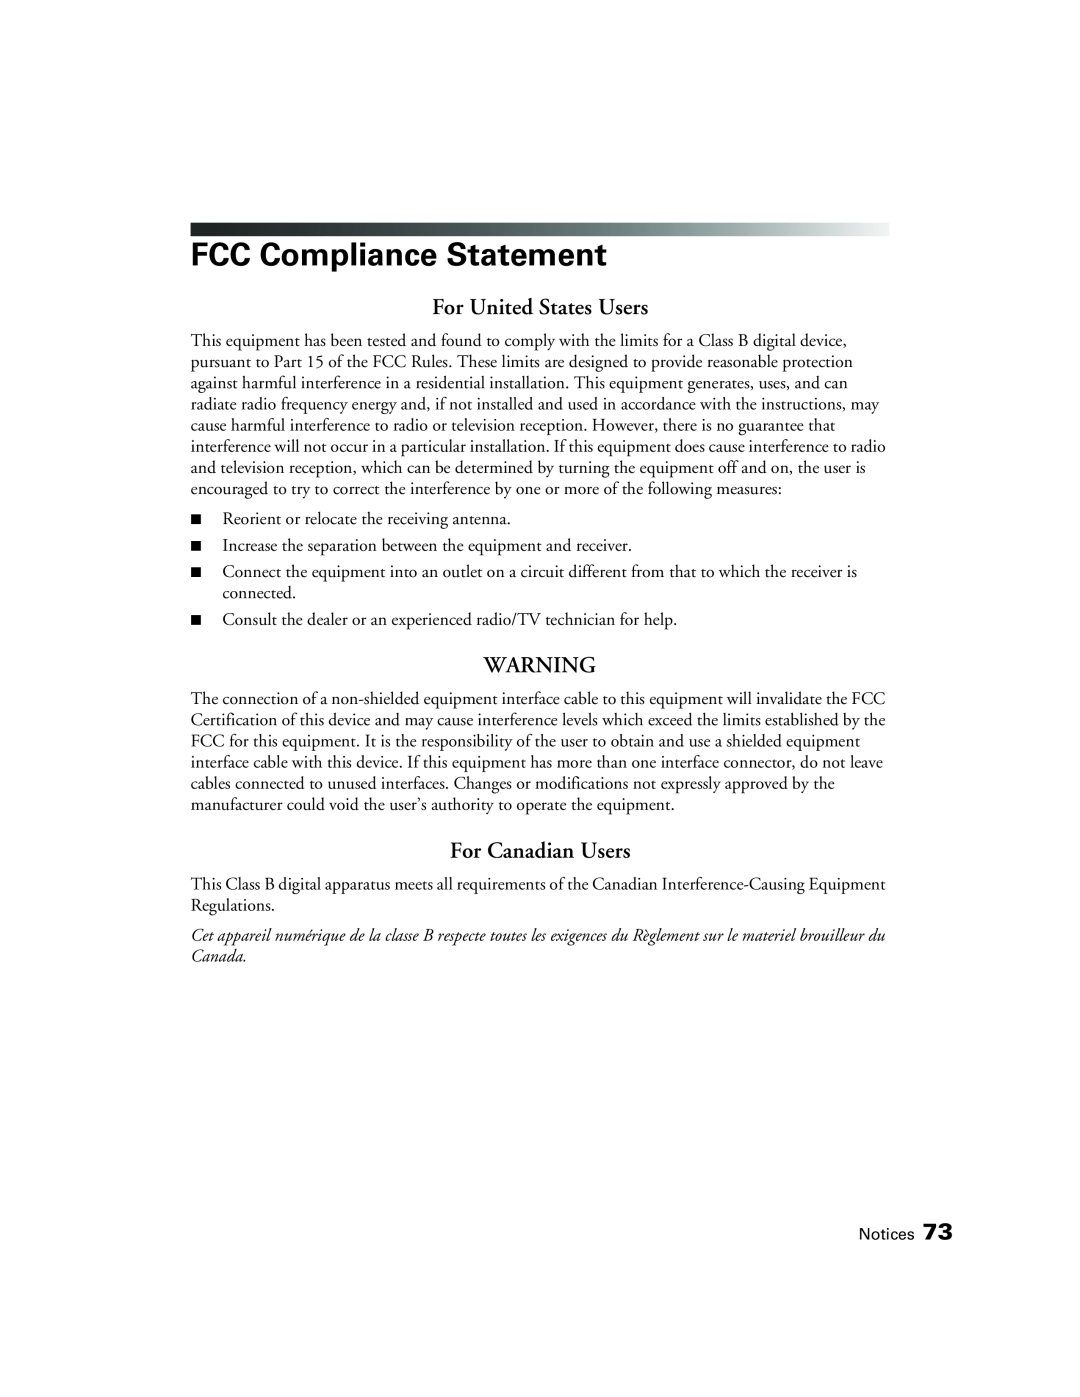 Epson 9700, 9350 manual FCC Compliance Statement, For United States Users, For Canadian Users 